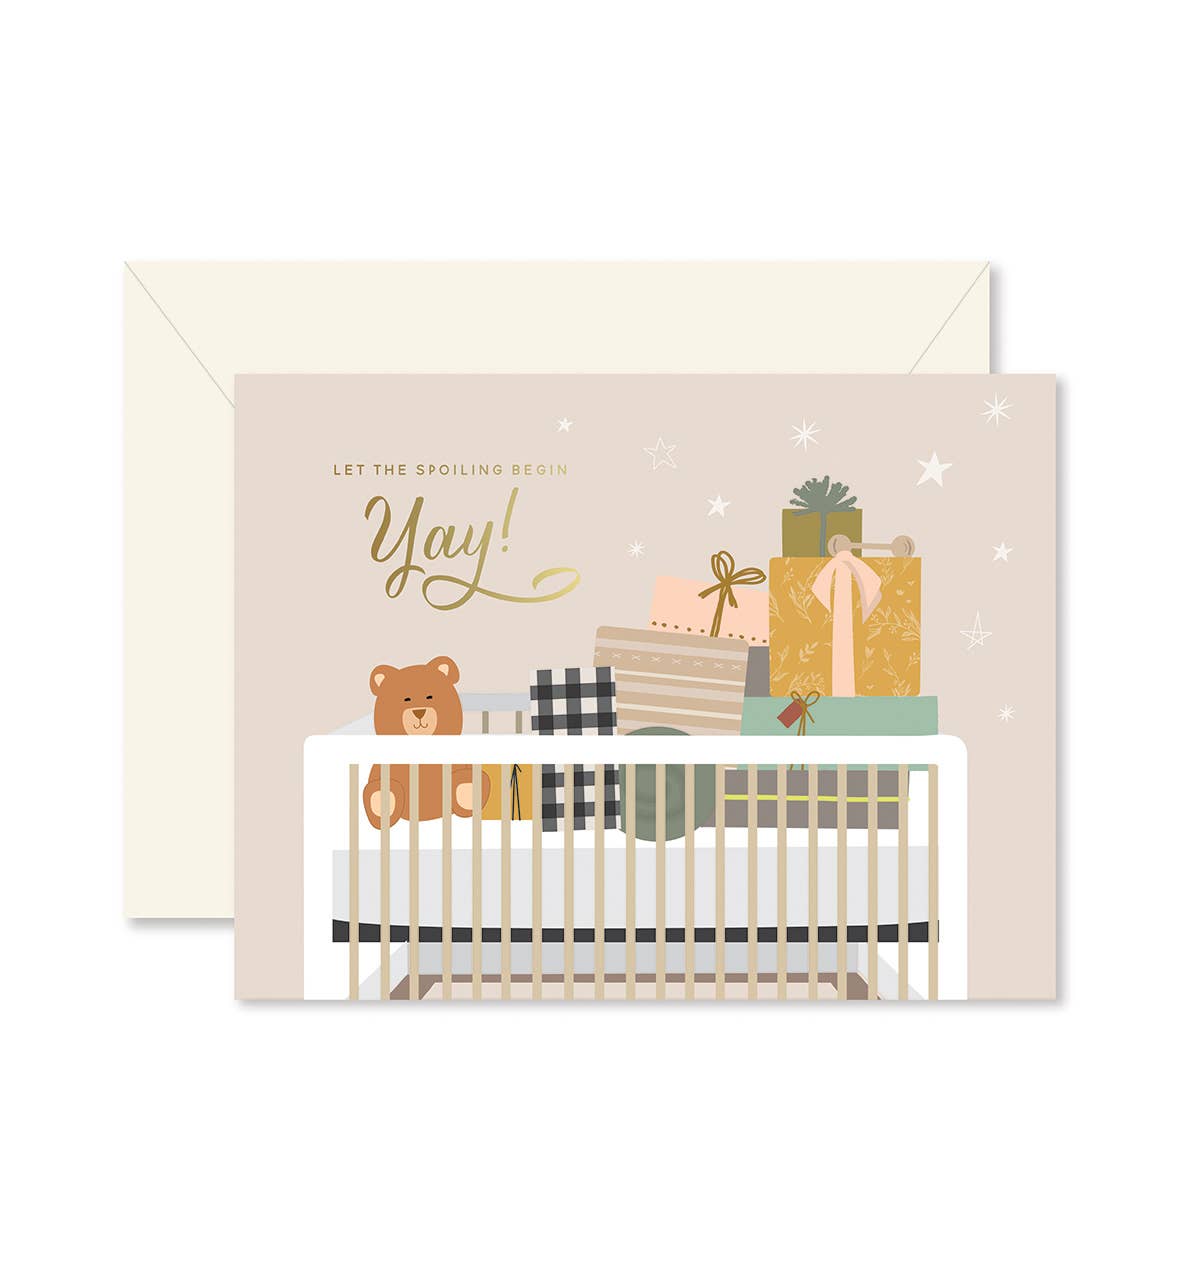 Spoiling Baby Greeting Card with coordinating envelope by Ginger P. Designs. Card front has a crib filled with presents and saying let the spoiling begin yay!